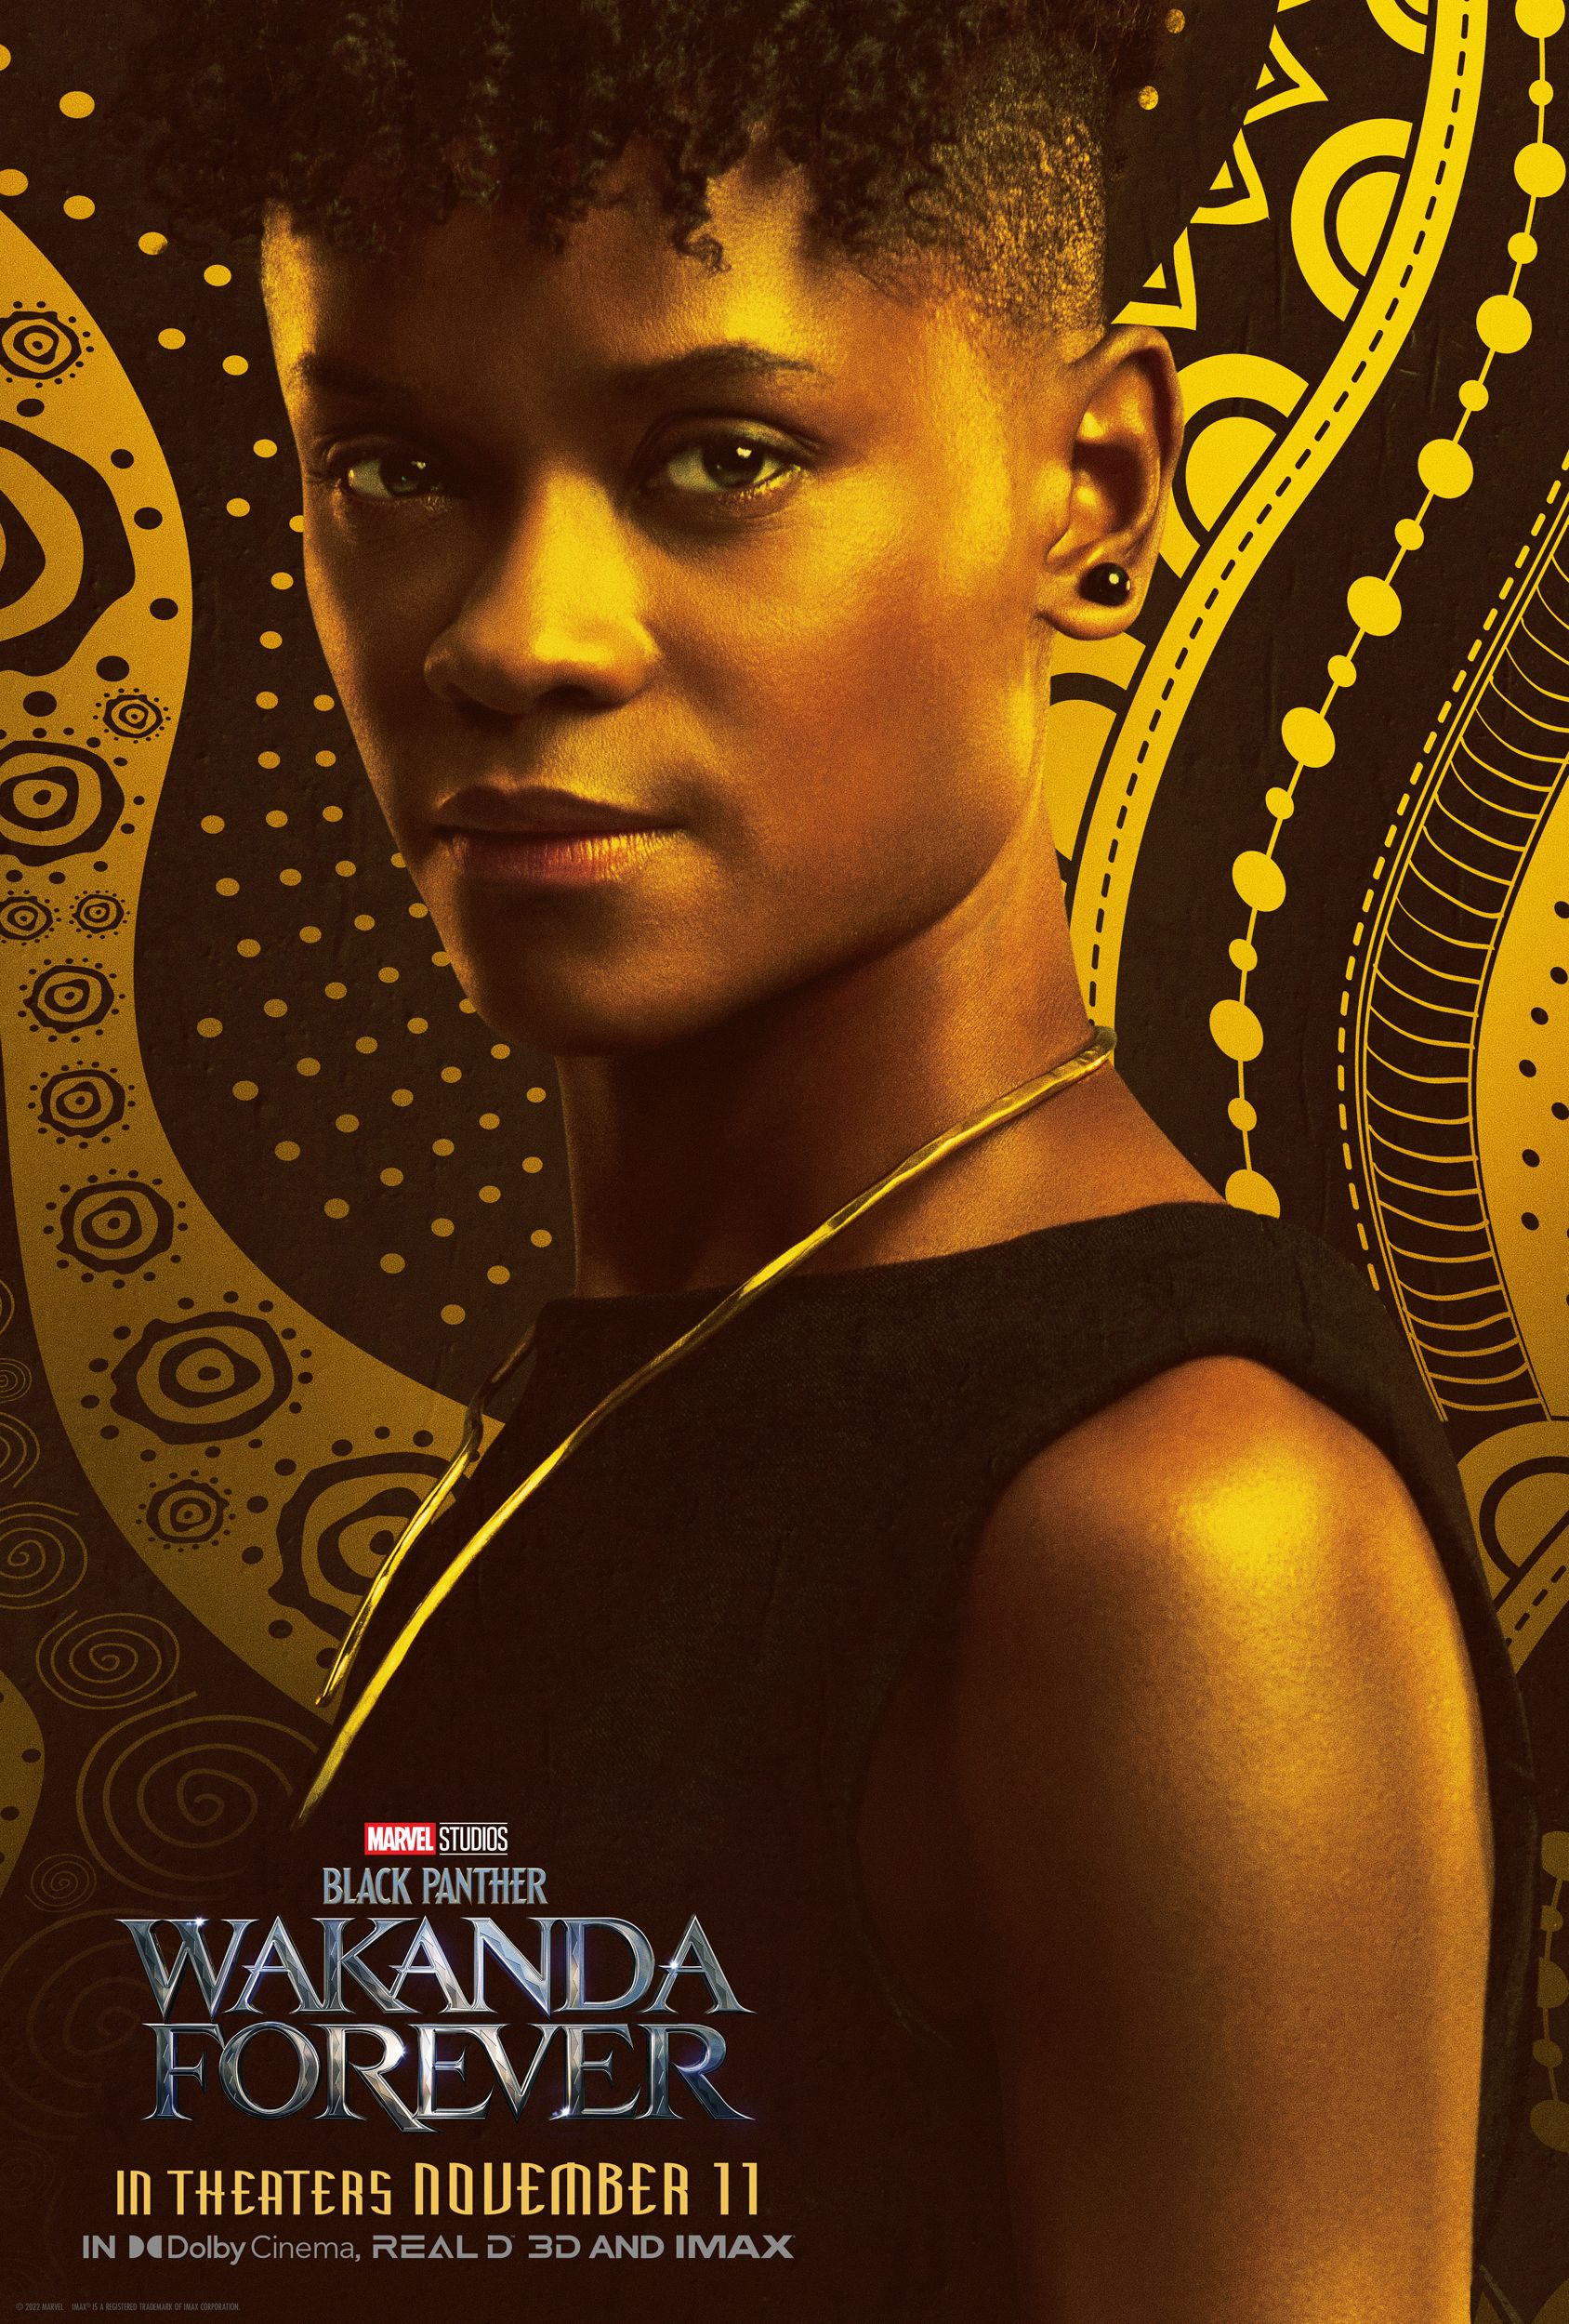 Letitia Wright in a poster for Black Panther: Wakanda Forever